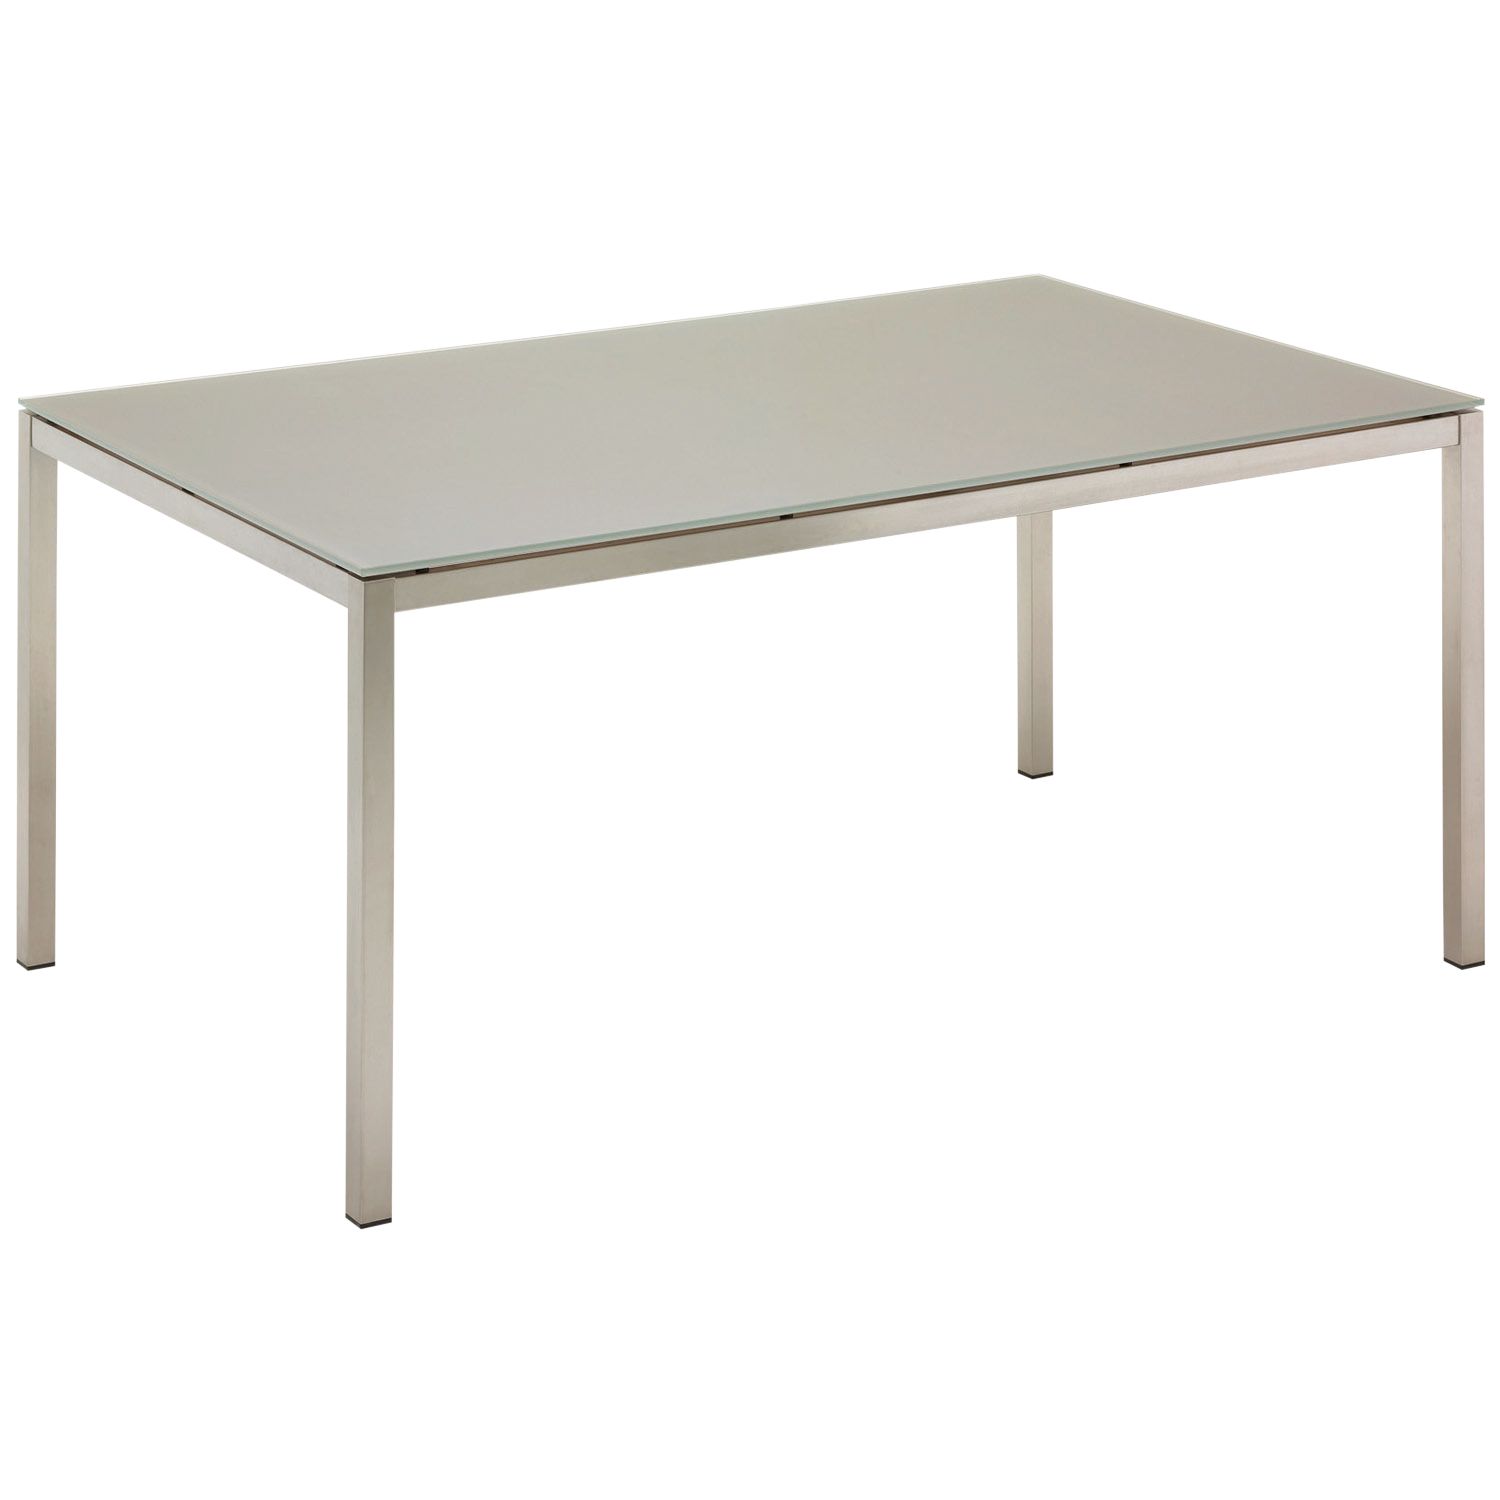 Gloster Kore Rectangular 6 Seater Dining Table, Taupe Glass, width 162cm